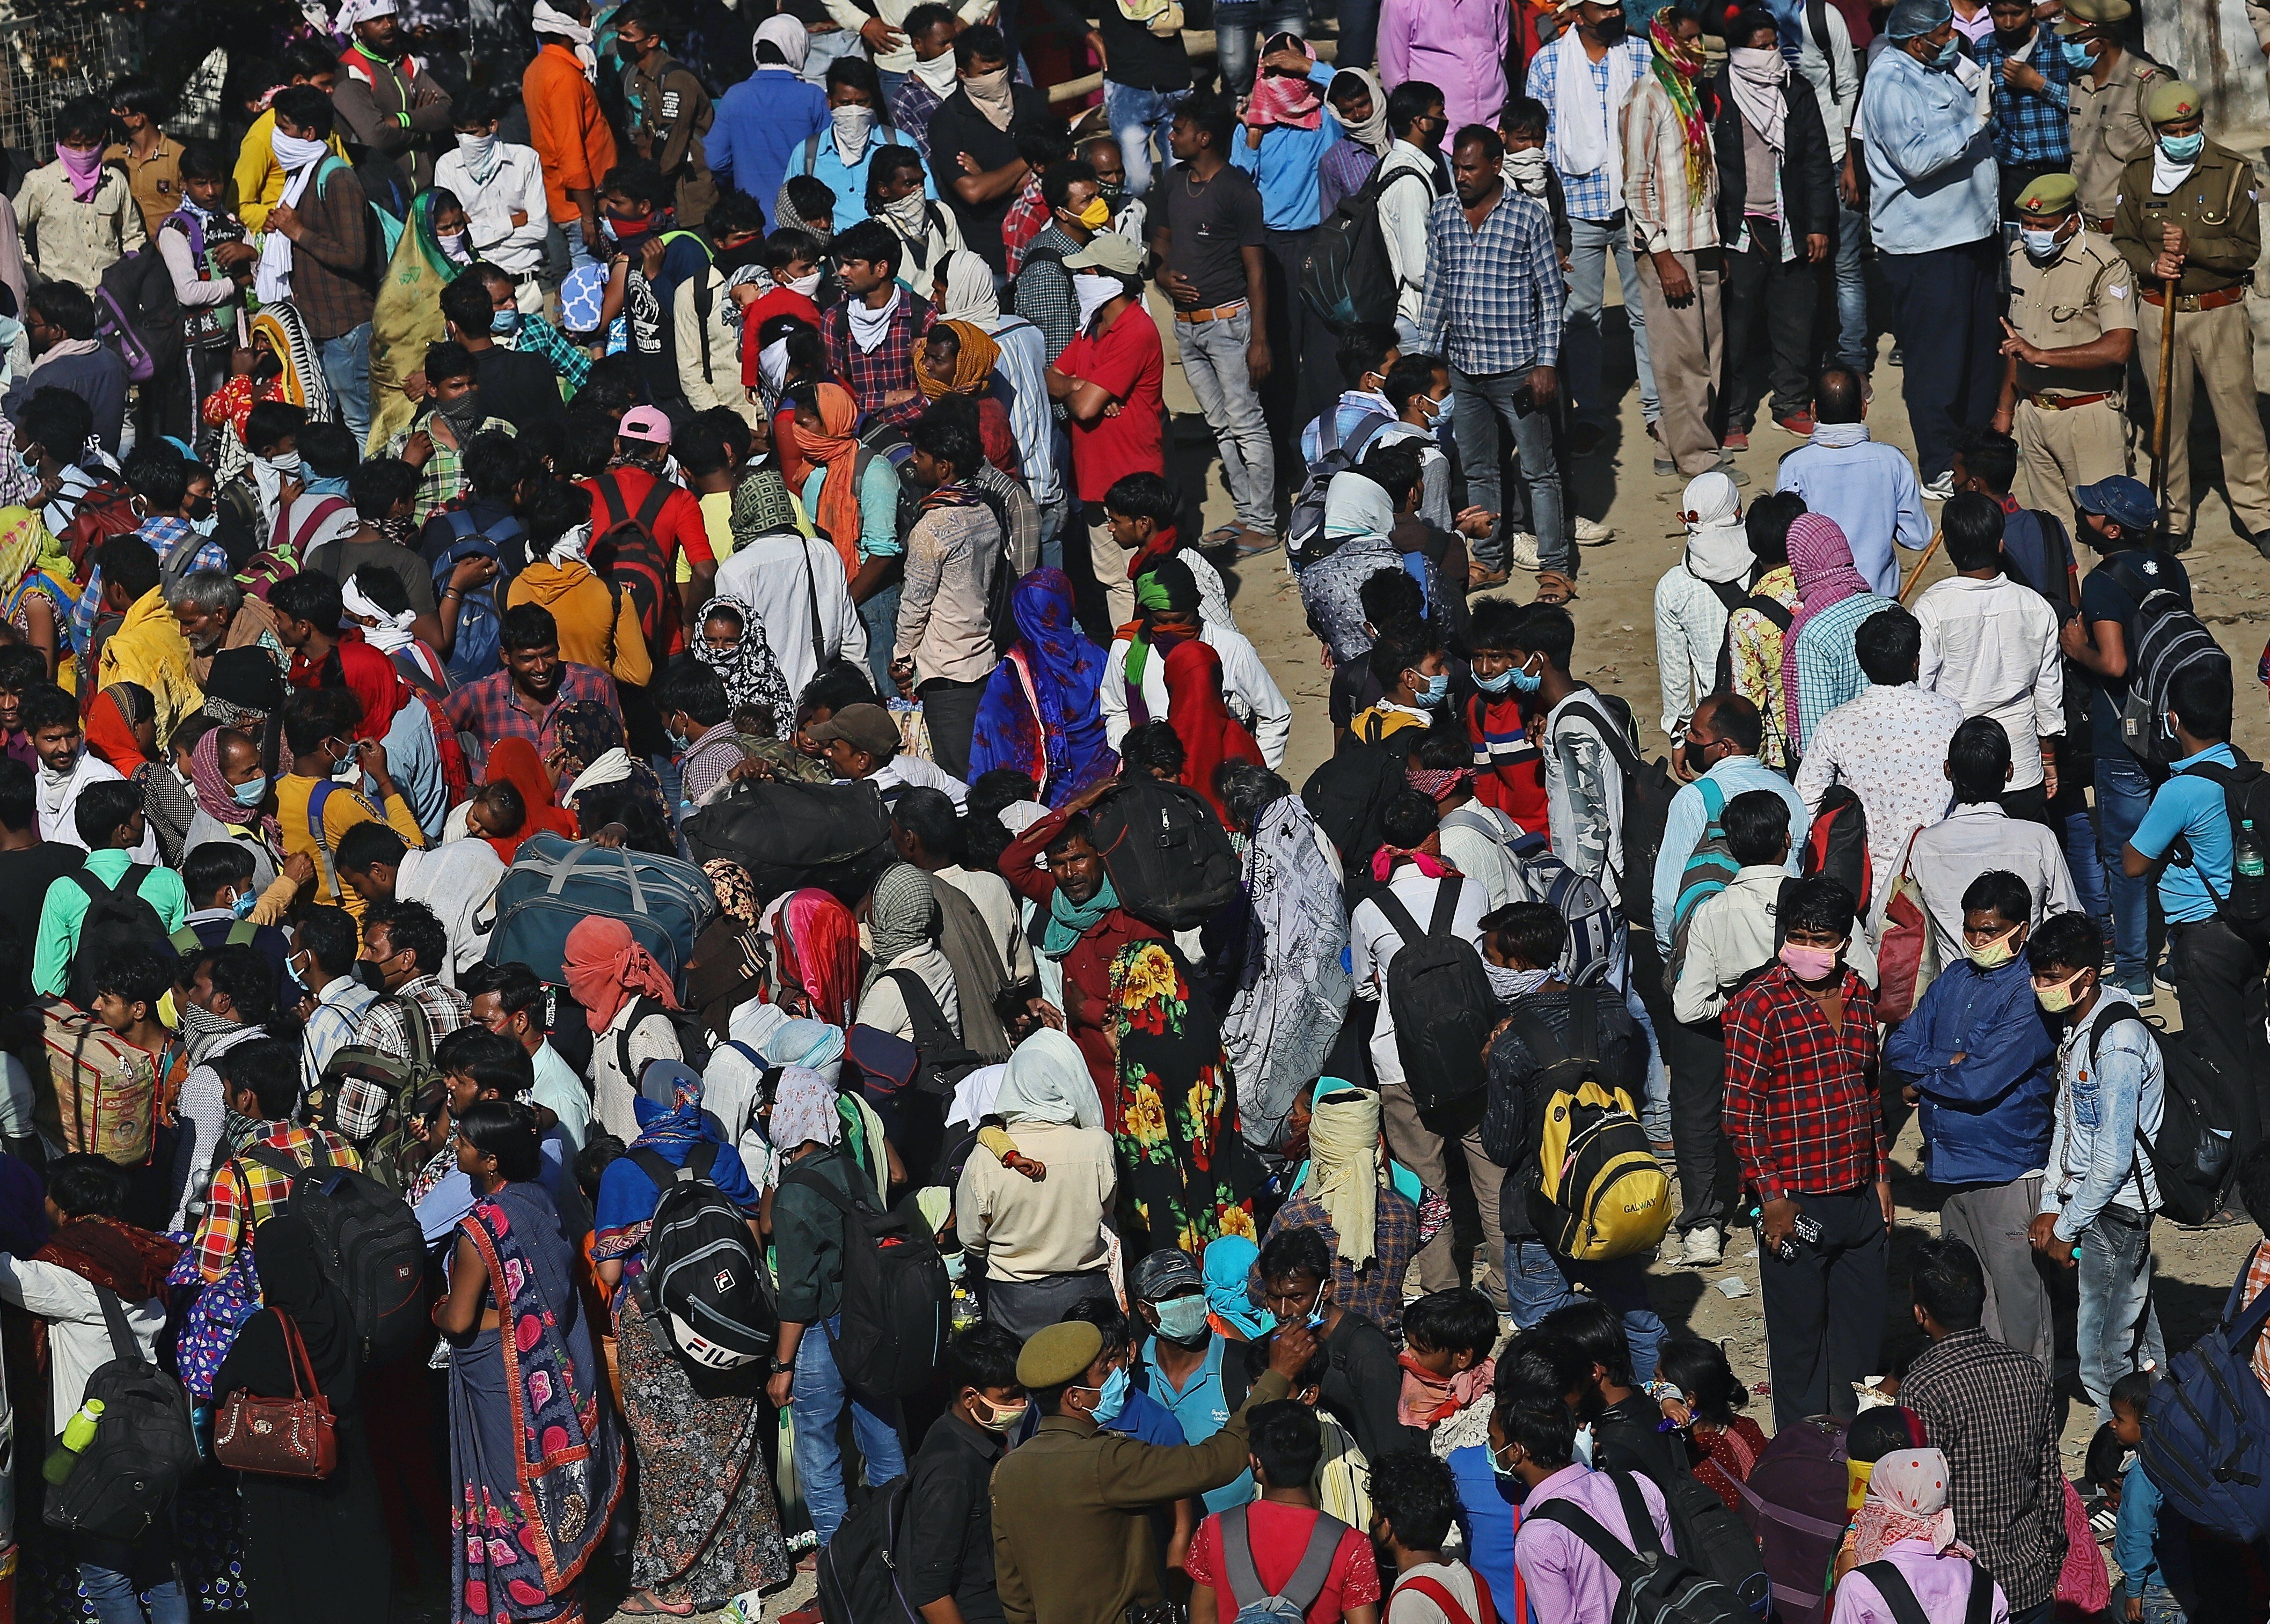 Migrant workers try to catch buses on the outskirts of Delhi amid the coronavirus lockdown. Photo: Bloomberg